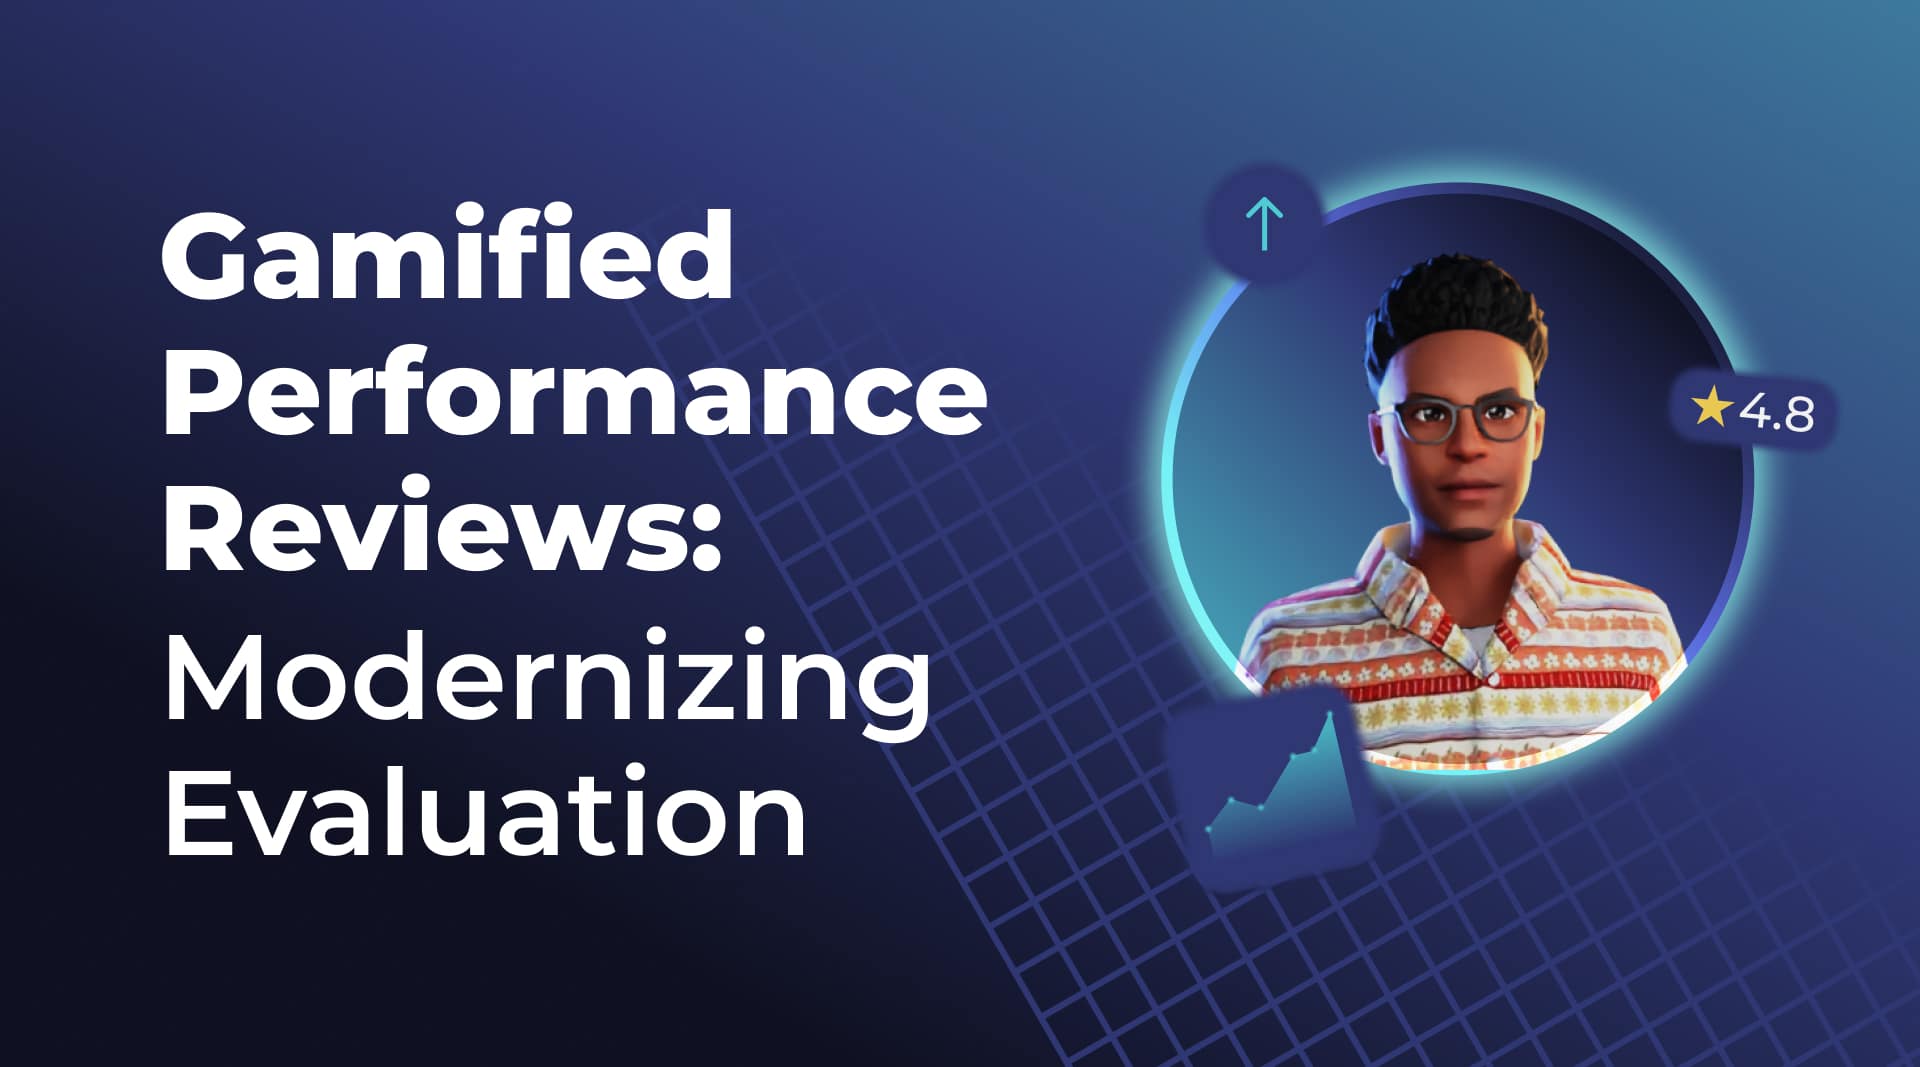 Blog post titled "Gamified Performance Reviews: Modernizing Evaluation"